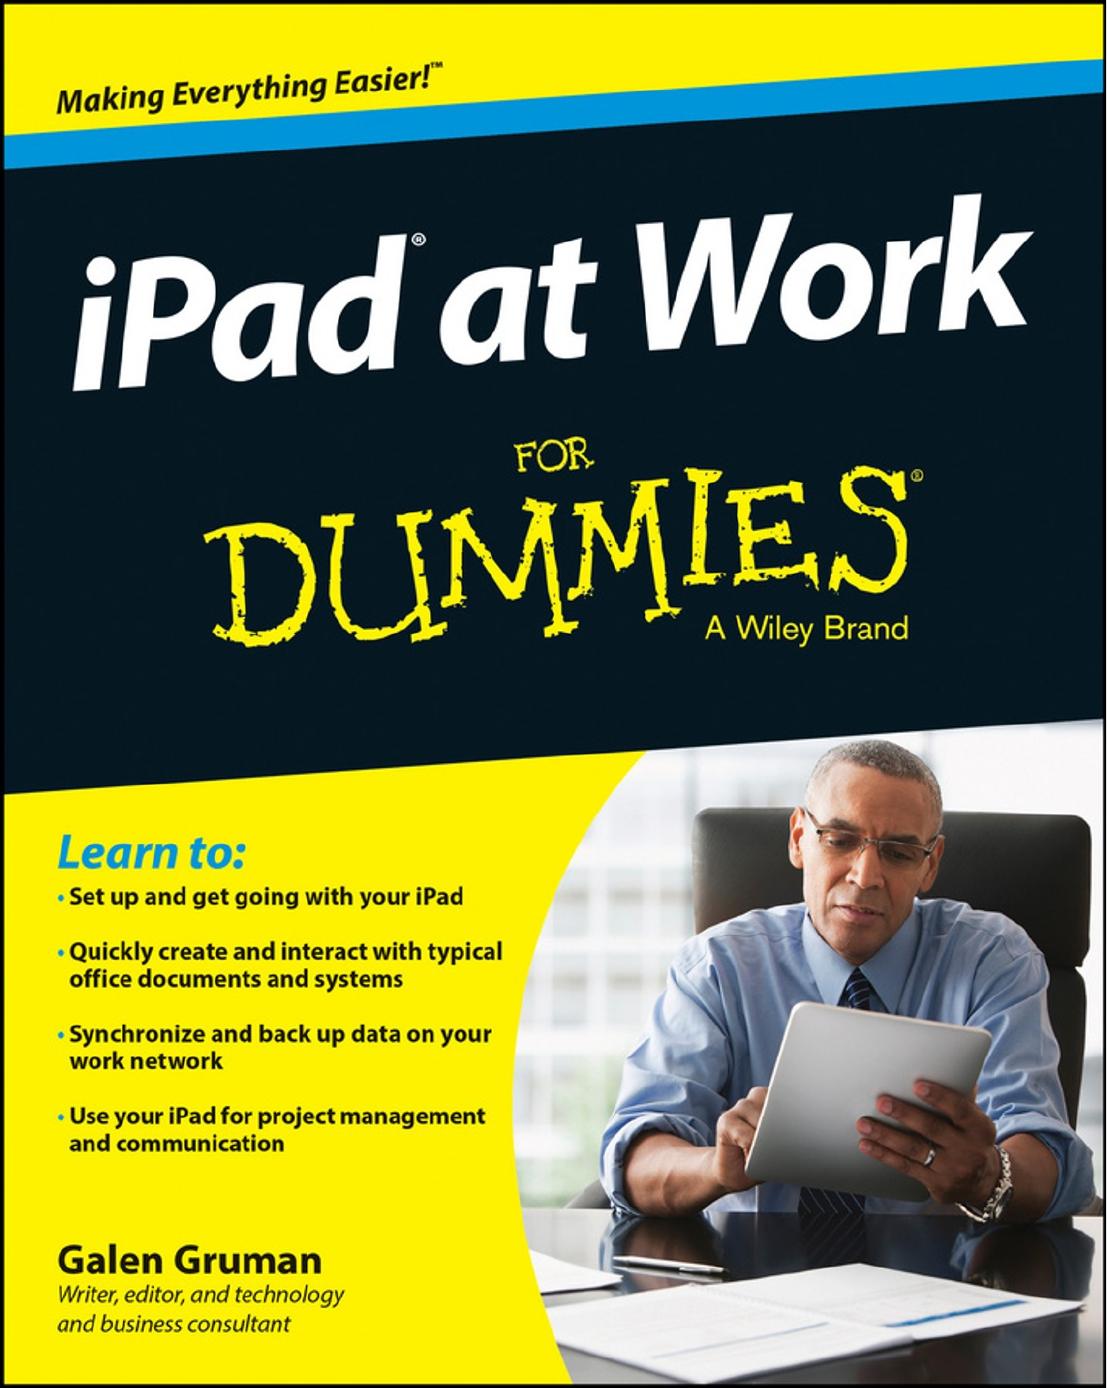 iPad at Work For Dummies by Galen Gruman